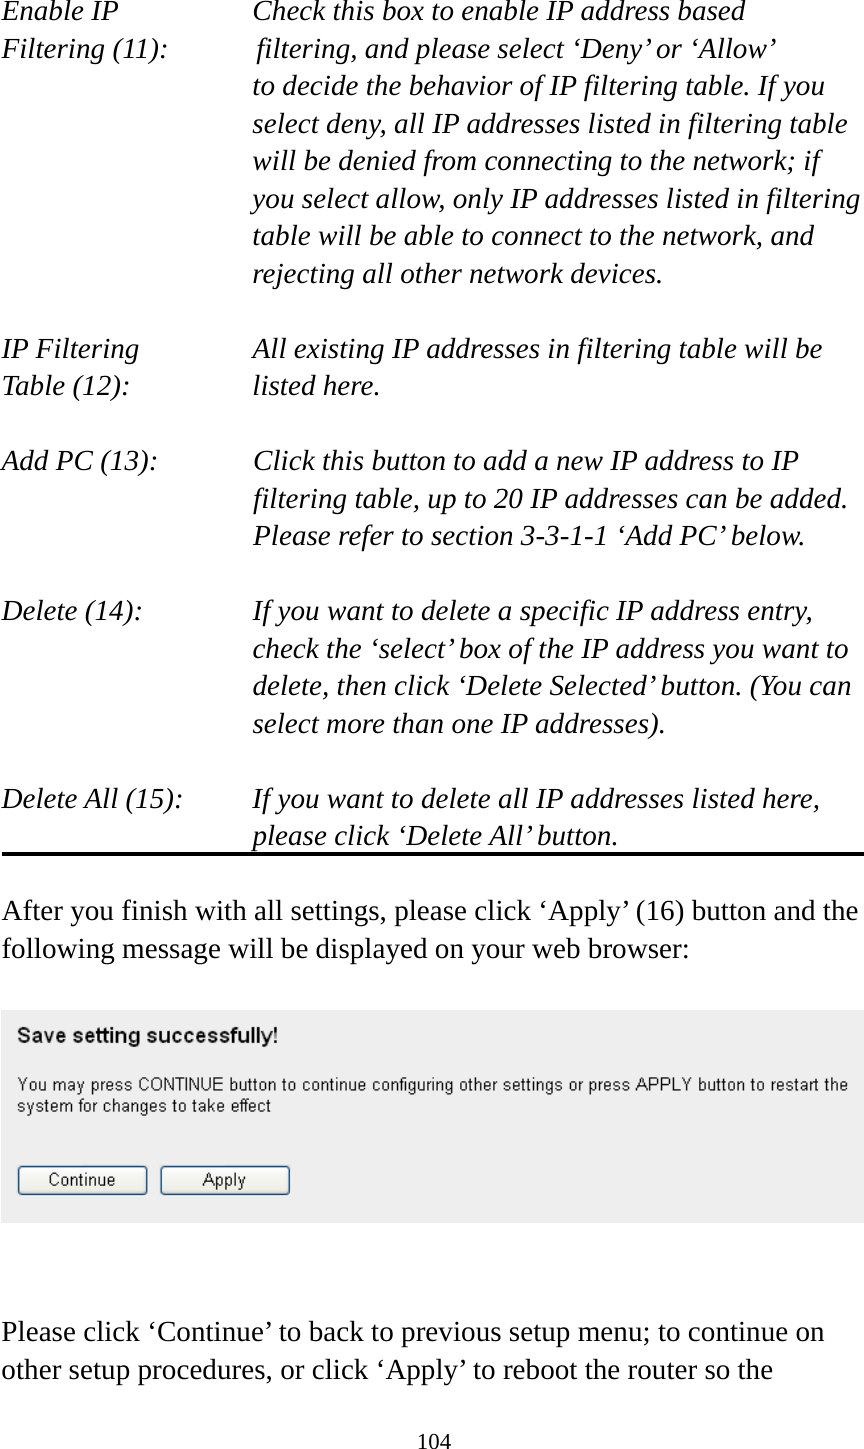 104  Enable IP        Check this box to enable IP address based Filtering (11):      filtering, and please select ‘Deny’ or ‘Allow’   to decide the behavior of IP filtering table. If you select deny, all IP addresses listed in filtering table will be denied from connecting to the network; if you select allow, only IP addresses listed in filtering table will be able to connect to the network, and rejecting all other network devices.  IP Filtering      All existing IP addresses in filtering table will be Table (12):       listed here.  Add PC (13):    Click this button to add a new IP address to IP filtering table, up to 20 IP addresses can be added.   Please refer to section 3-3-1-1 ‘Add PC’ below.    Delete (14):      If you want to delete a specific IP address entry,     check the ‘select’ box of the IP address you want to delete, then click ‘Delete Selected’ button. (You can select more than one IP addresses).  Delete All (15):    If you want to delete all IP addresses listed here, please click ‘Delete All’ button.  After you finish with all settings, please click ‘Apply’ (16) button and the following message will be displayed on your web browser:     Please click ‘Continue’ to back to previous setup menu; to continue on other setup procedures, or click ‘Apply’ to reboot the router so the 